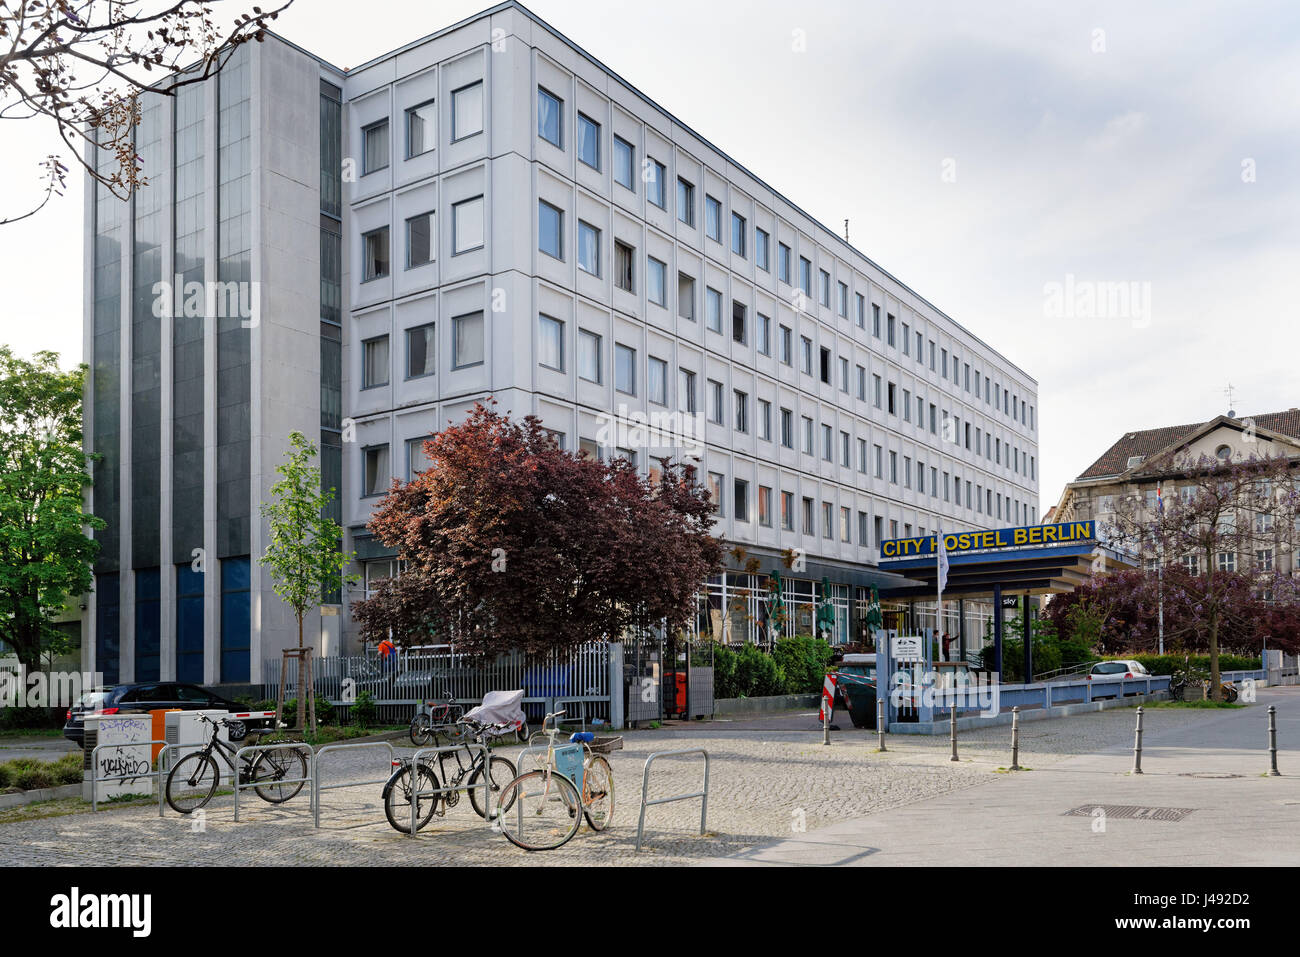 Berlin, Germany. 10th May, 2017. On wednesday the 10th of May 2017, the German gouvernement anounced, that the City Hostel Berlin, on the site of the North Korean embassy property, will be closed by violating UN rules Credit: Marcus Krauss/Alamy Live News Stock Photo